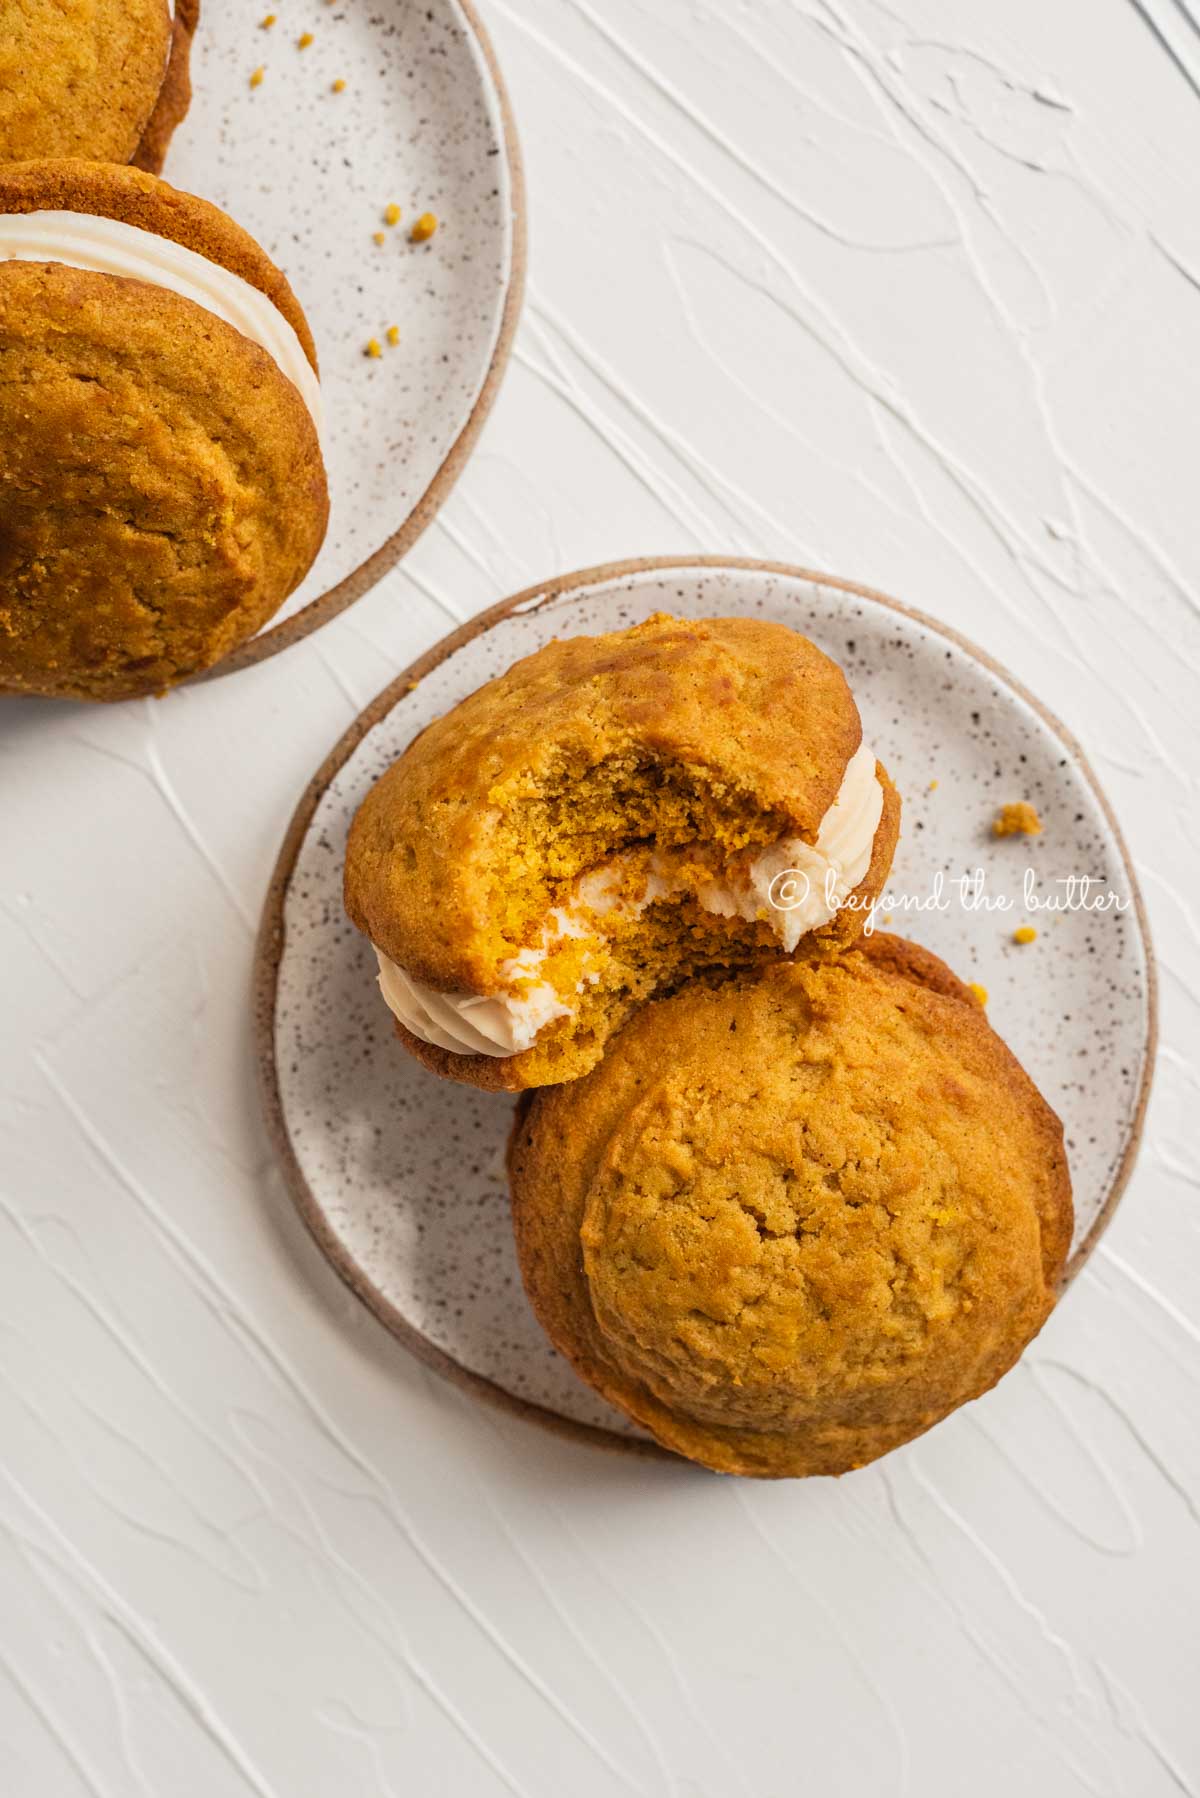 Pumpkin whoopie pies with one half eaten resting on 2 speckled dessert plates | All Images © Beyond the Butter™